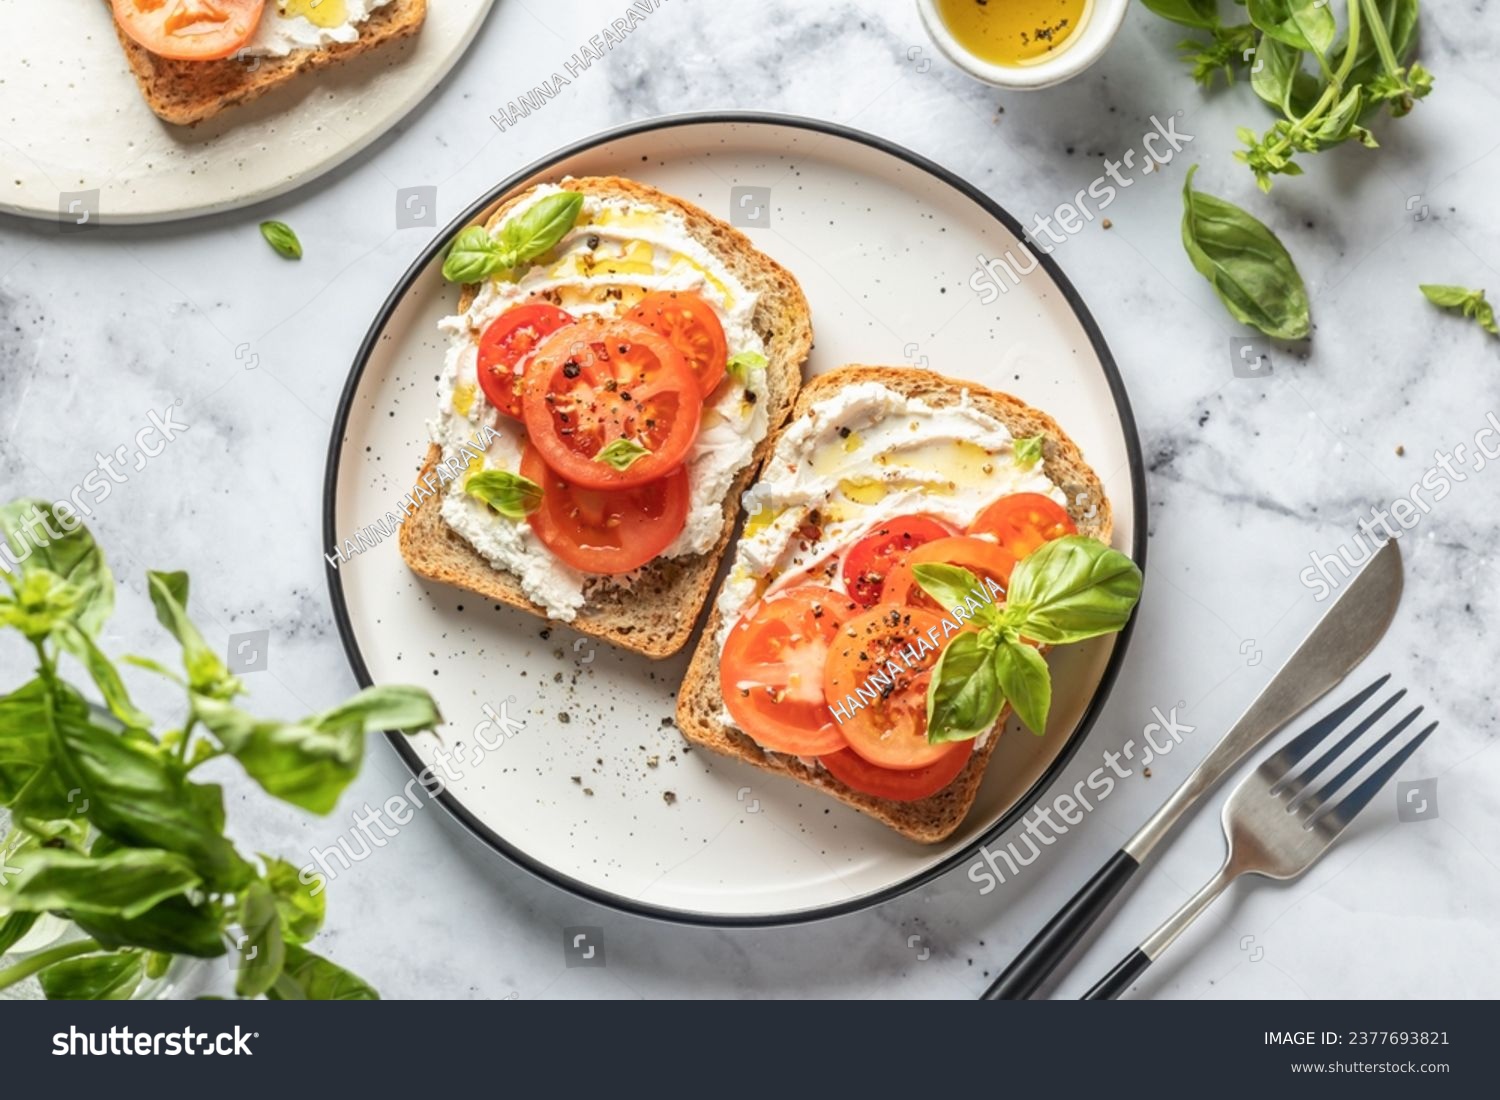 Sandwiches or toasts with tomatoes, cream cheese, olive oil and basil on a plate on white marble background. Traditional italian mediterranean food. Horizontal, top view, flat lay #2377693821